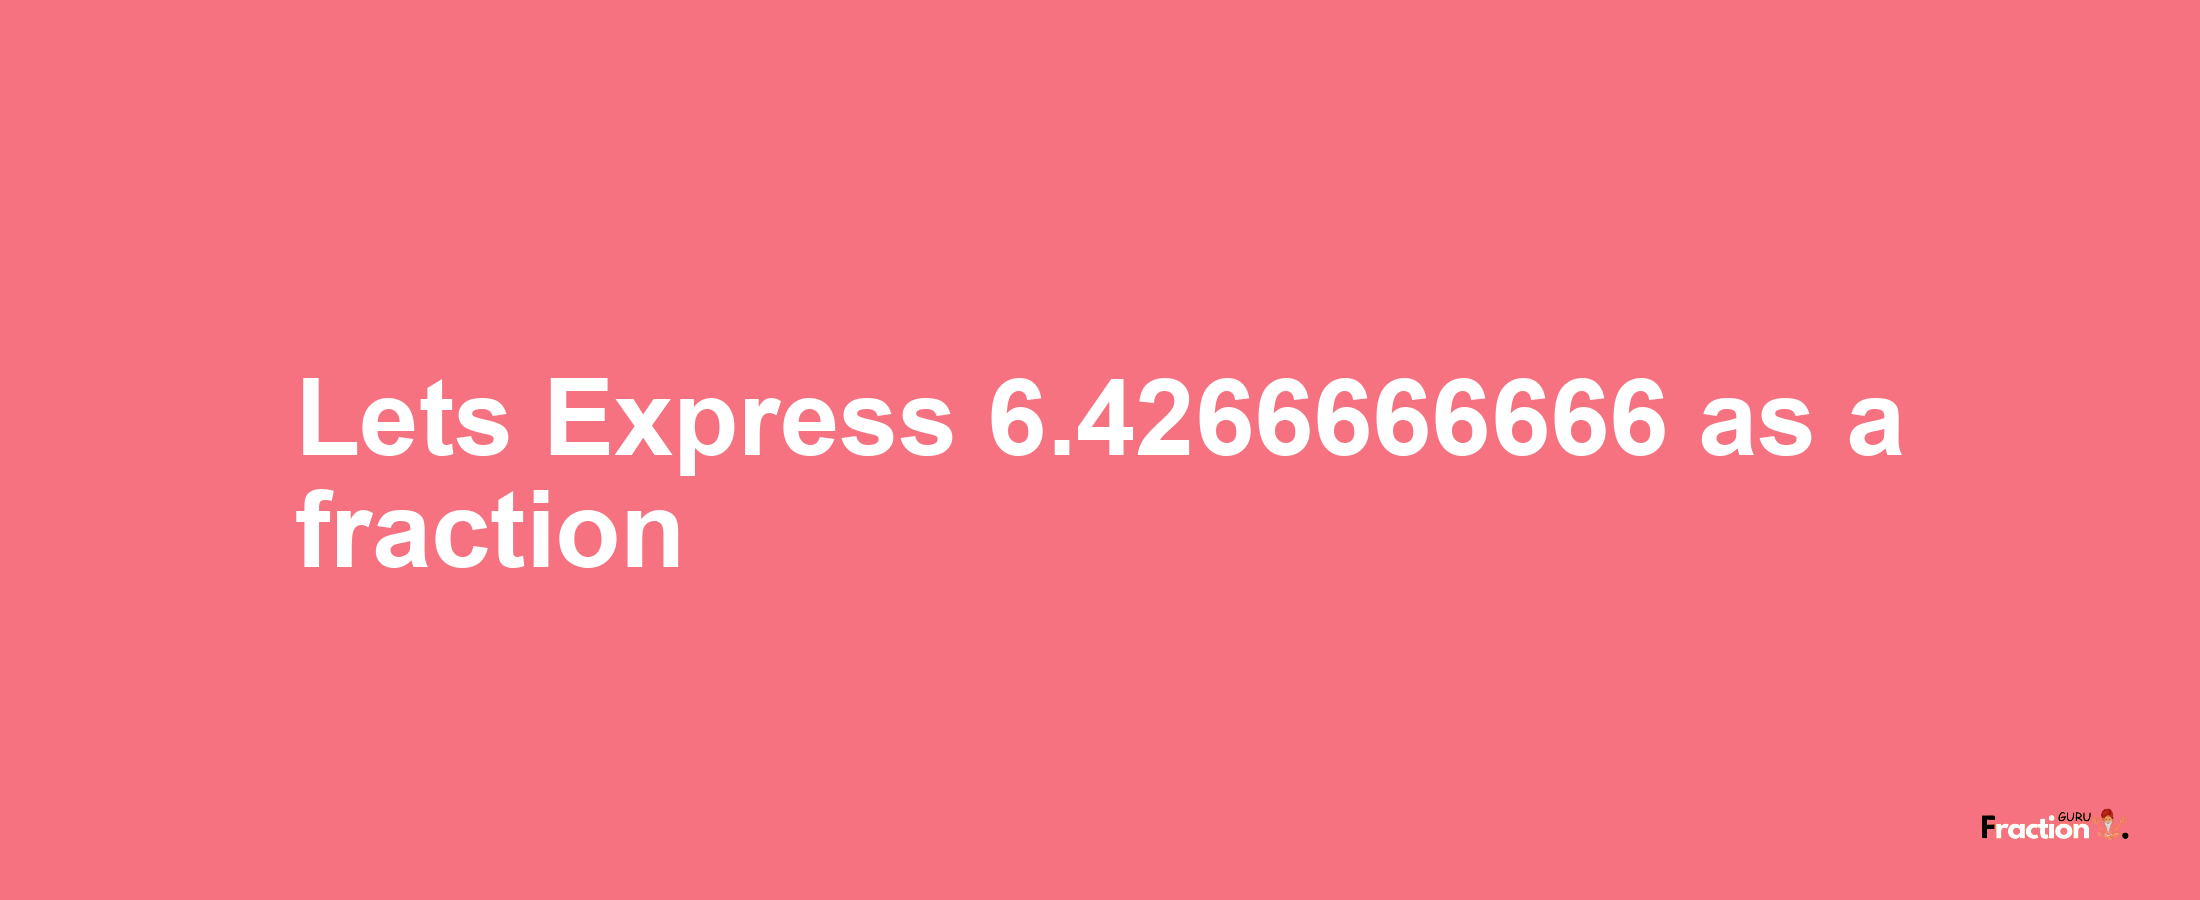 Lets Express 6.4266666666 as afraction